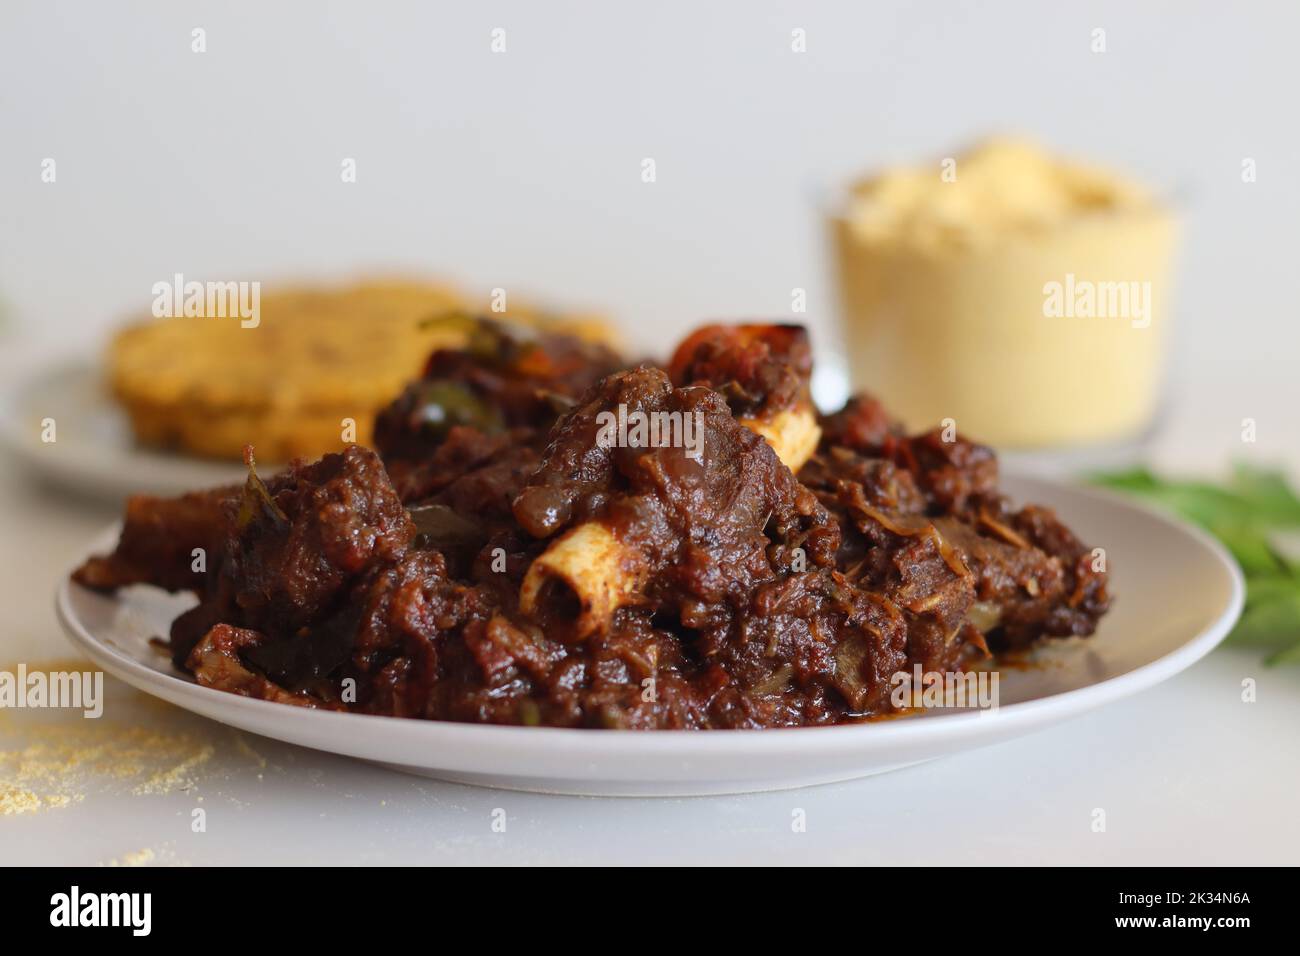 Mutton roast served with Makki ki roti or Maize roti. Spicy mutton roast prepared in Kerala style served with Indian flat unleavened bread made from c Stock Photo